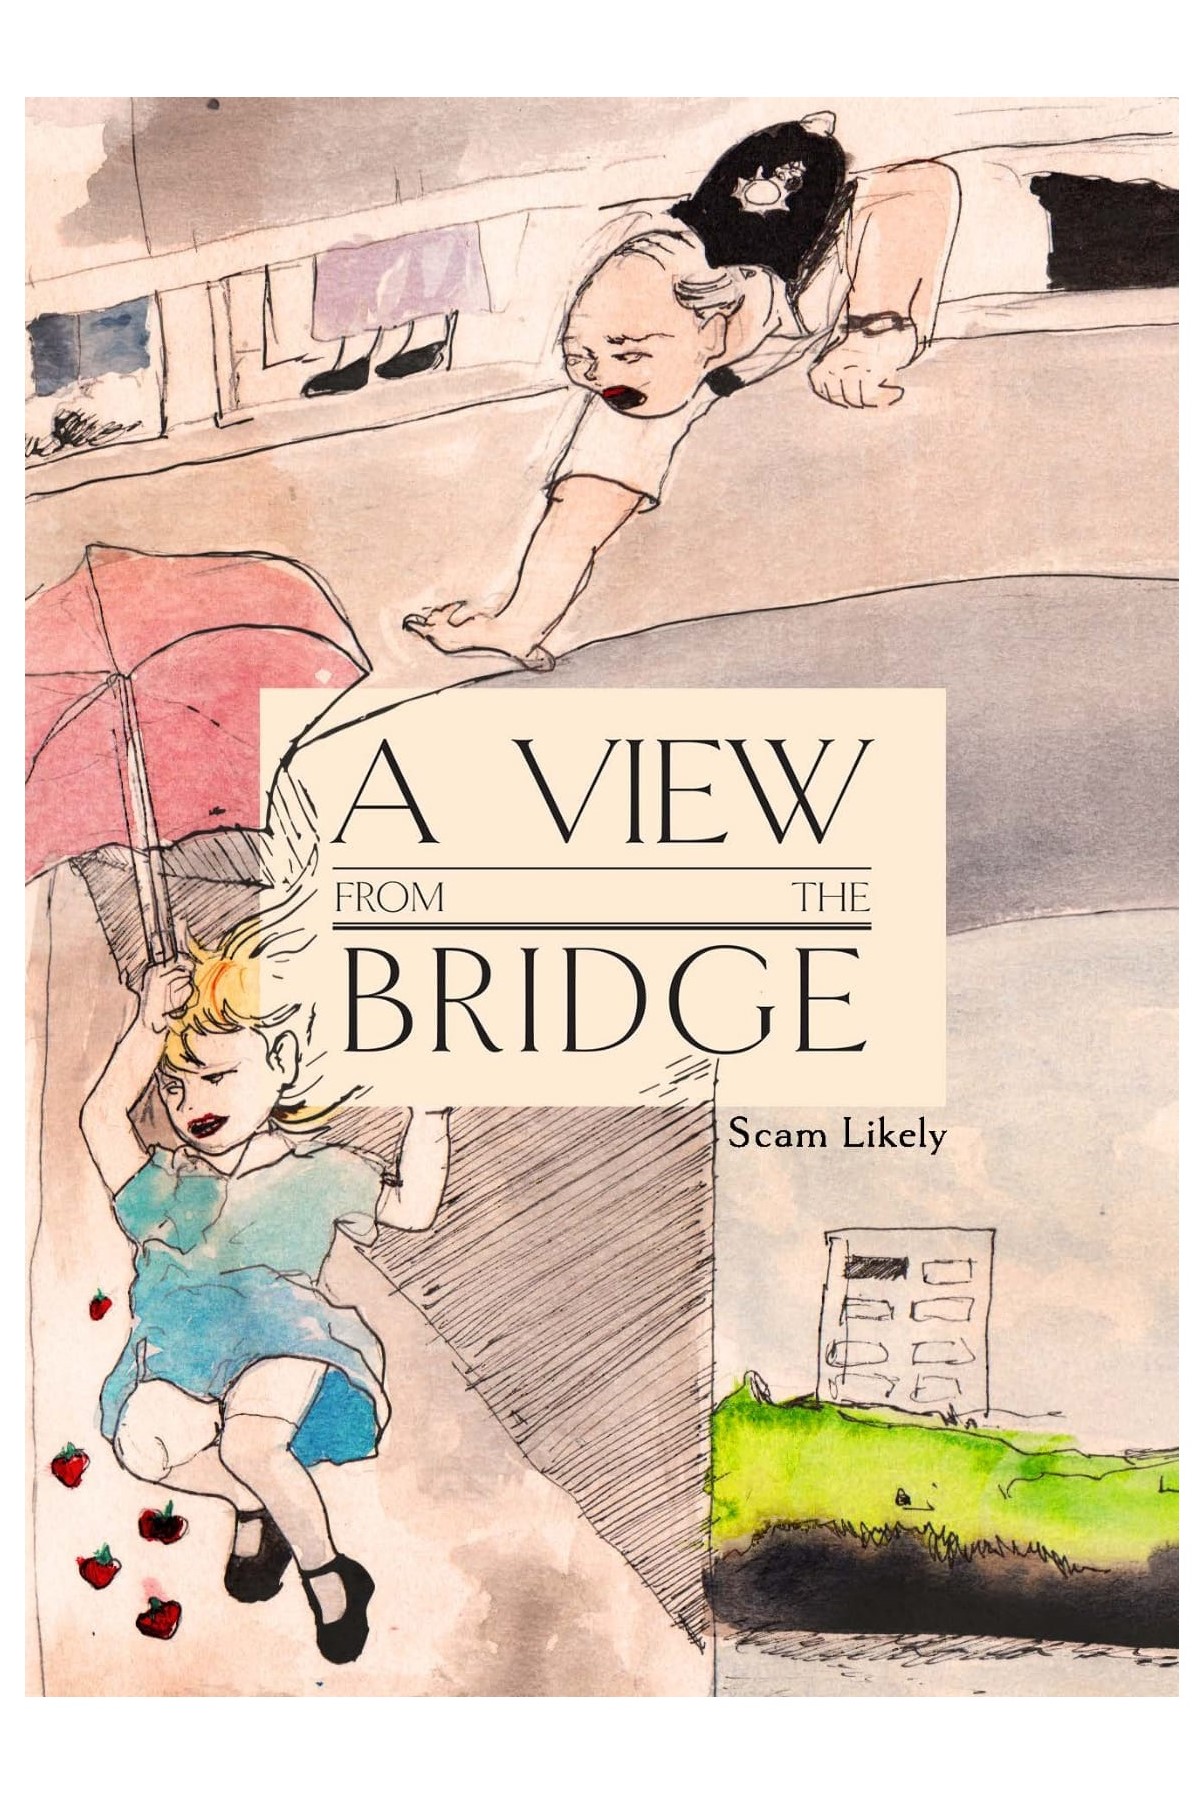 Book Review: A View from the Bridge by Scam Likely